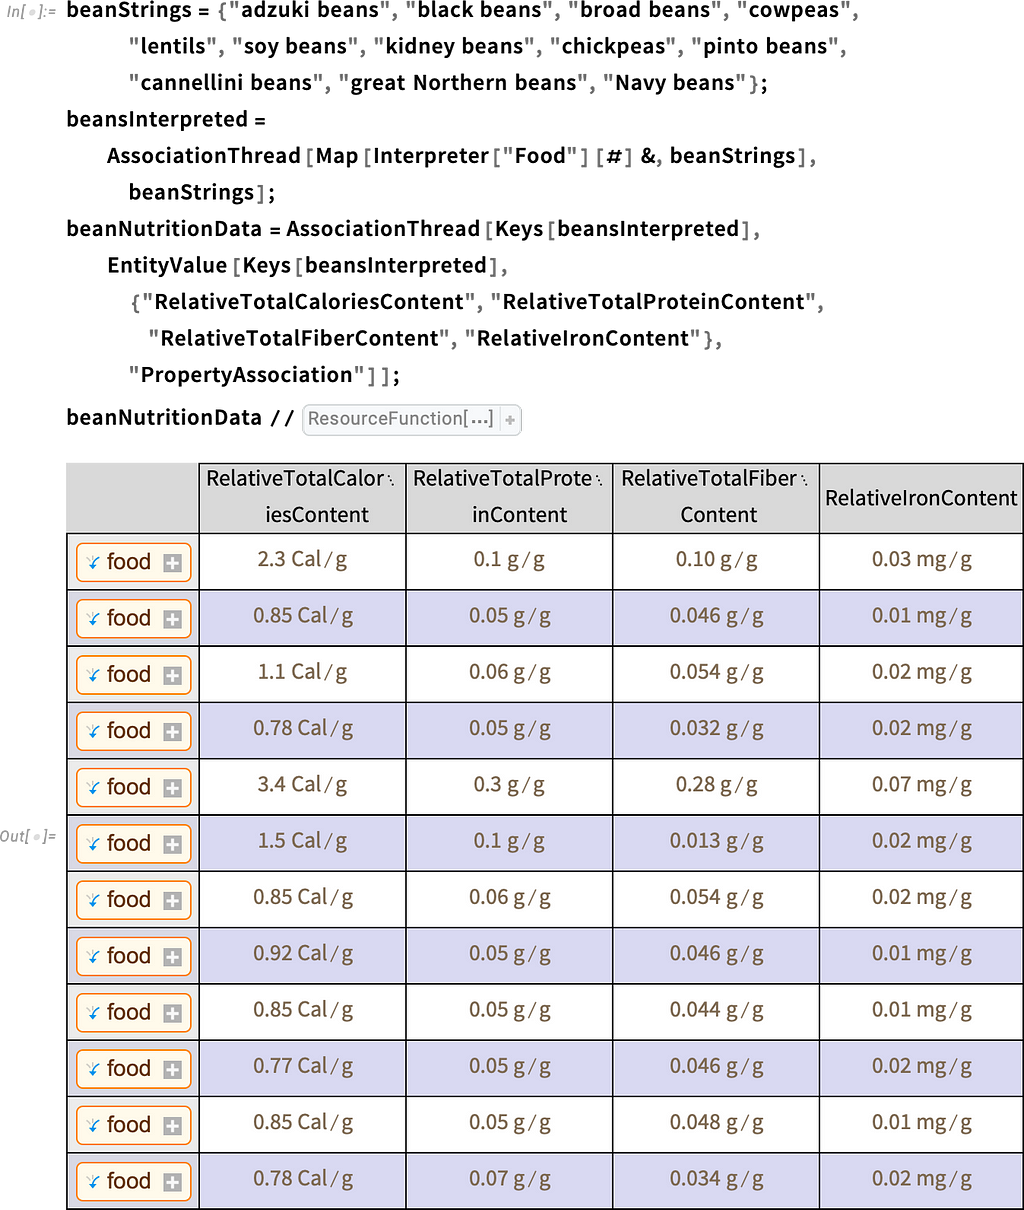 Table showing fiber, protein, et cetera, for various beans, as output by a code block